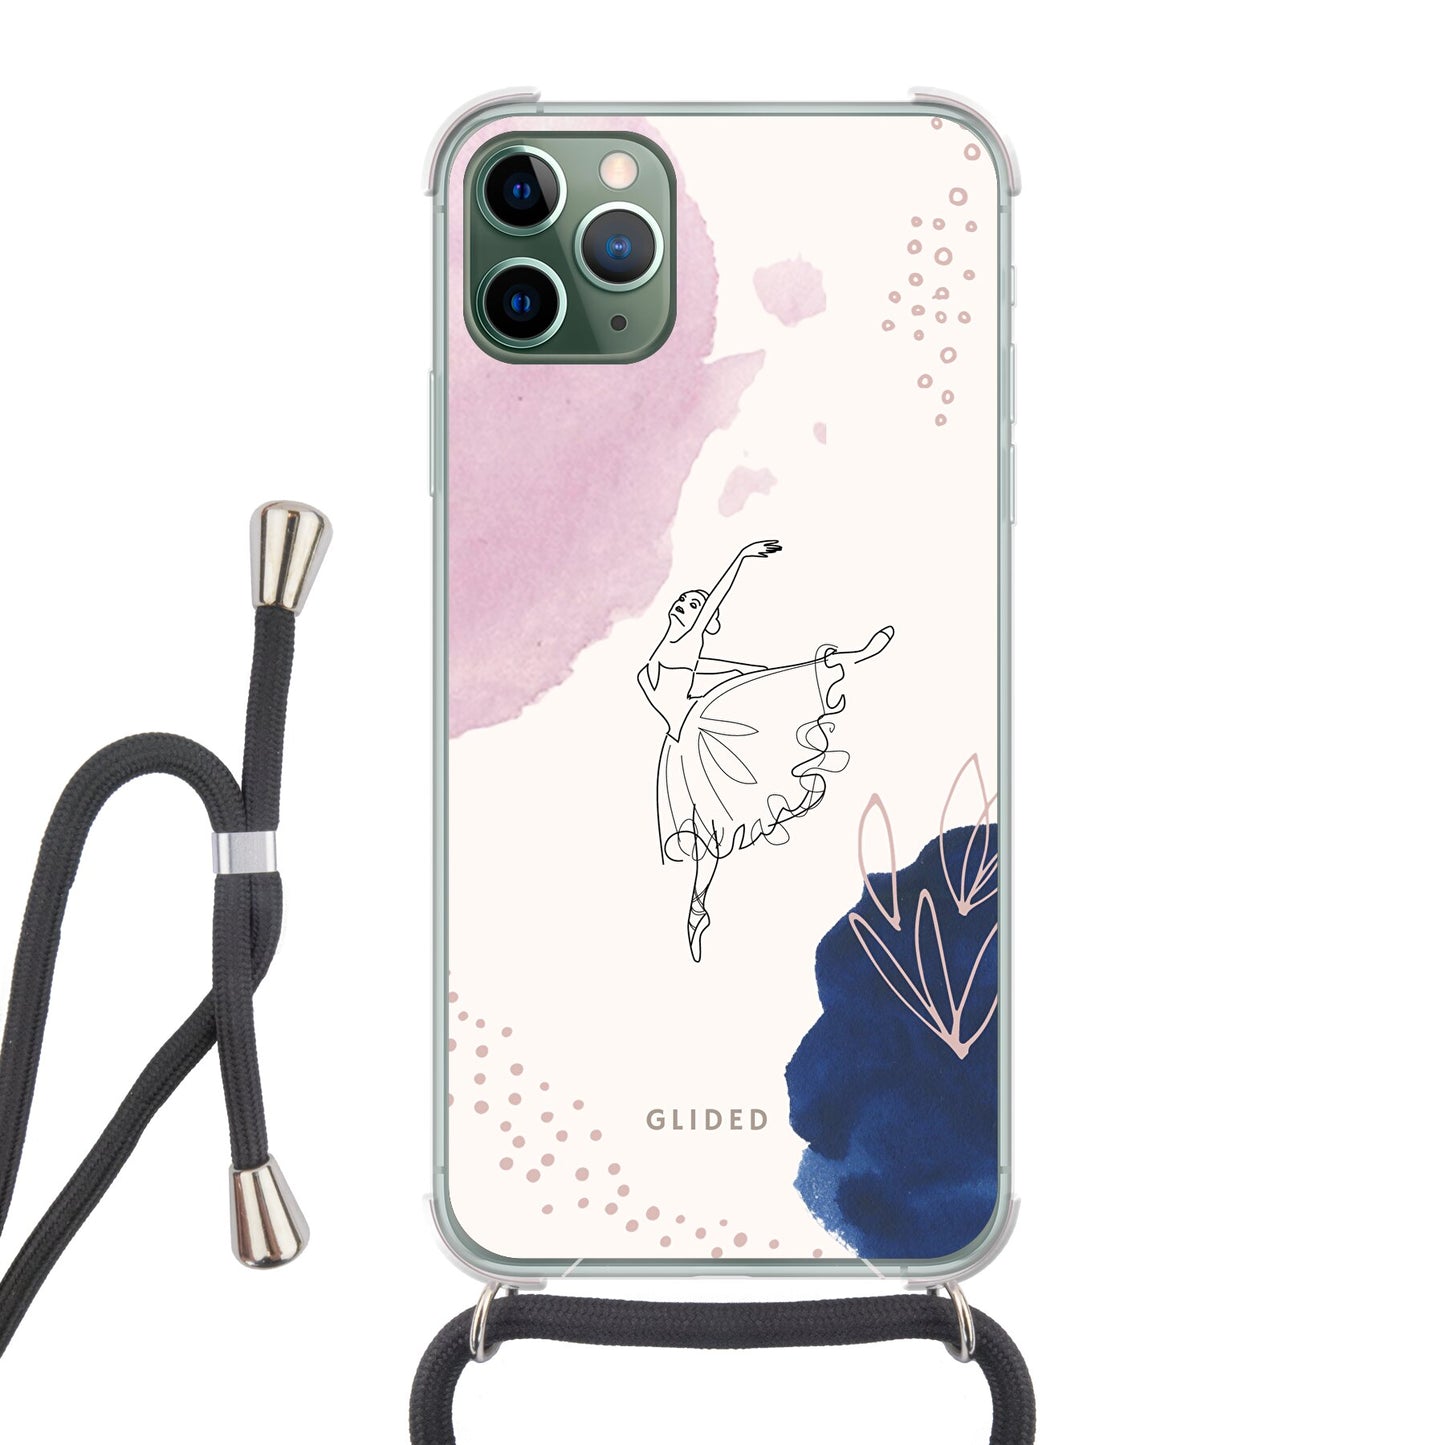 Grace - iPhone 11 Pro Max Handyhülle Crossbody case mit Band